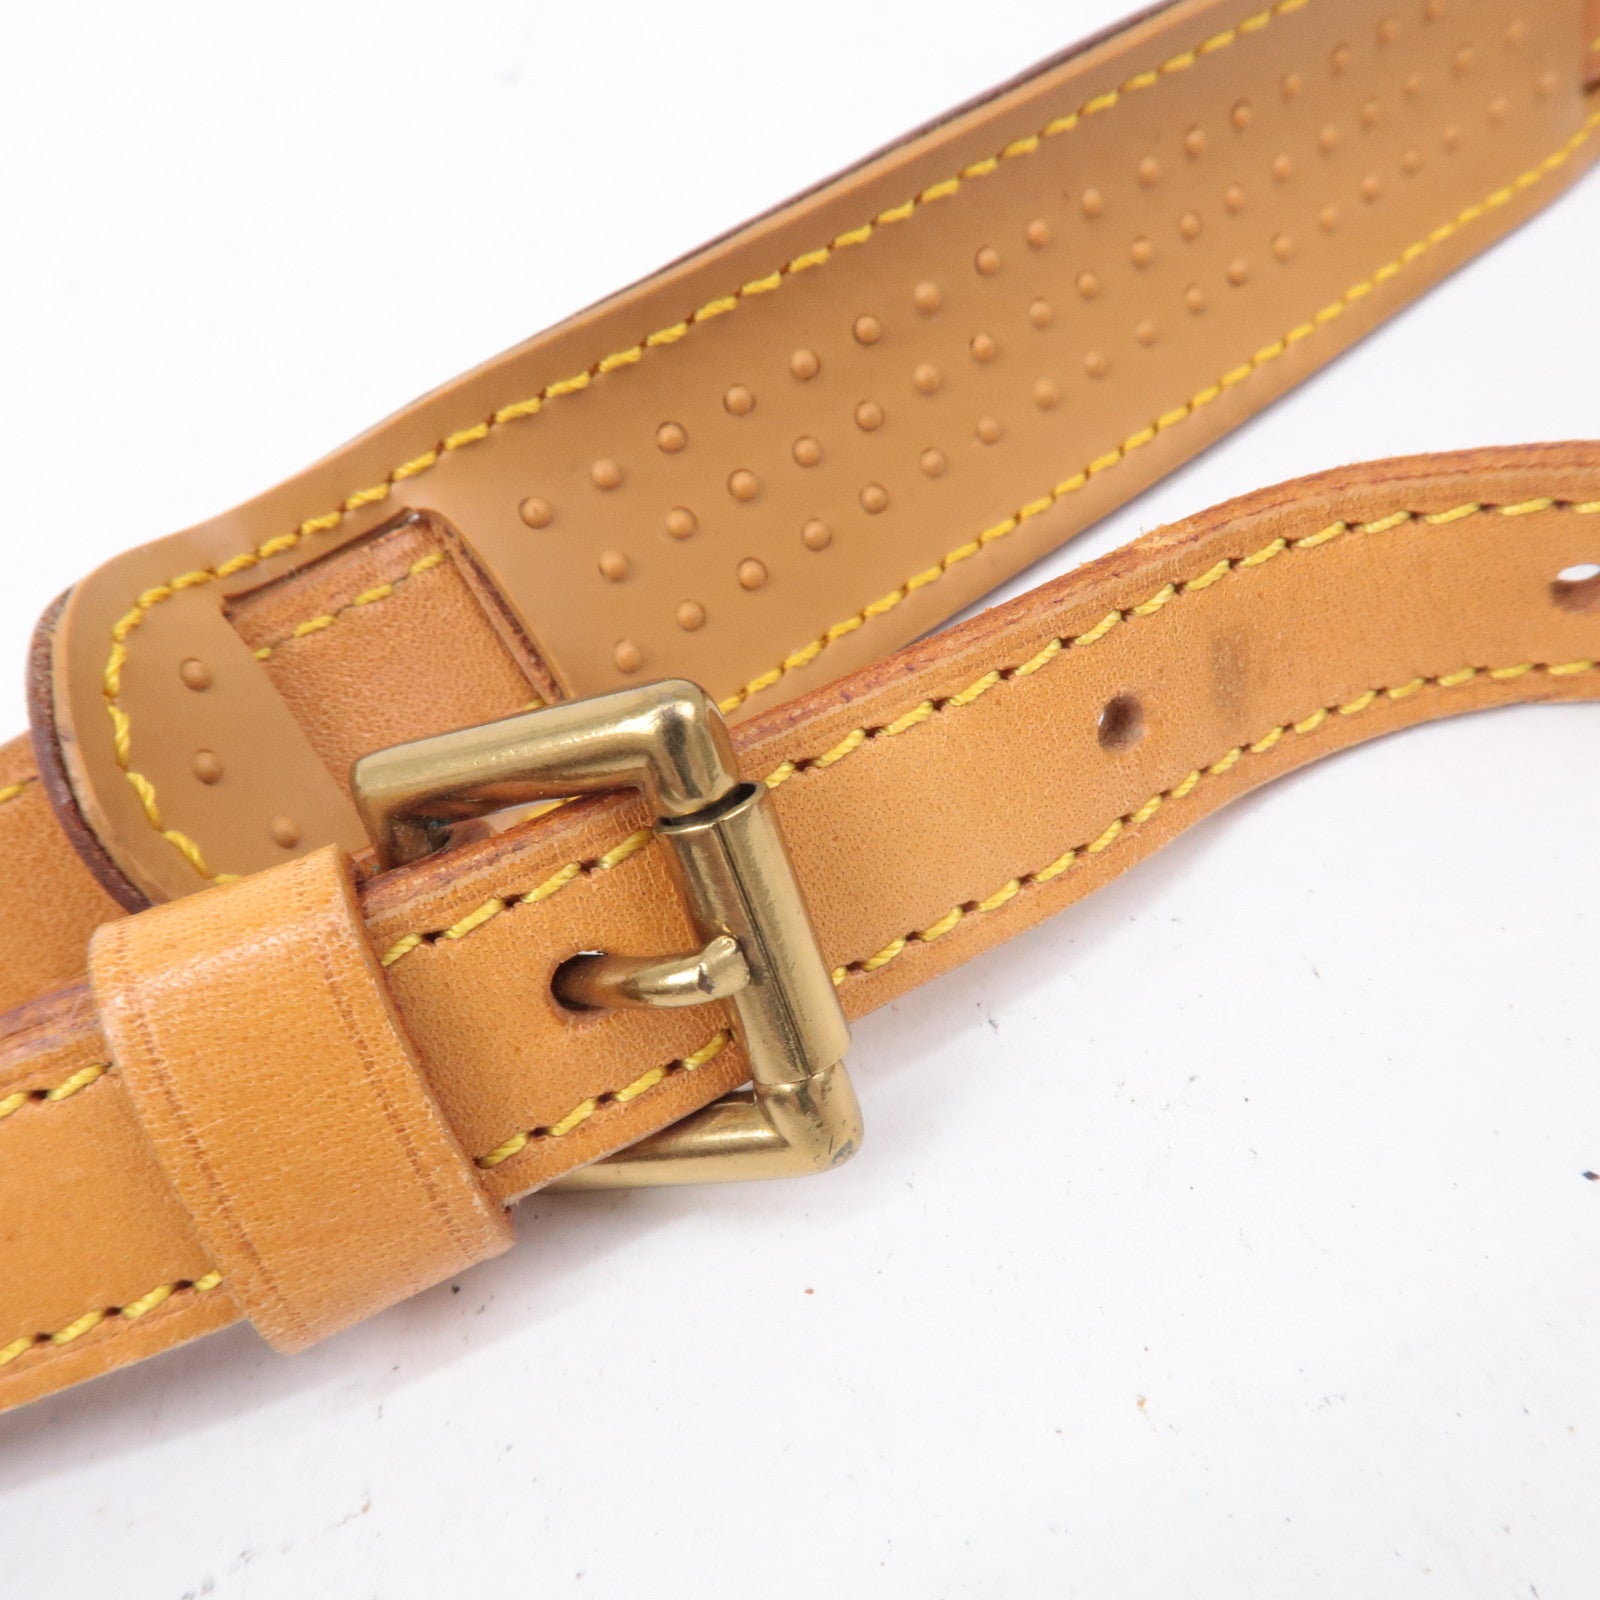 Louis Vuitton Purse Strap - 1,780 For Sale on 1stDibs